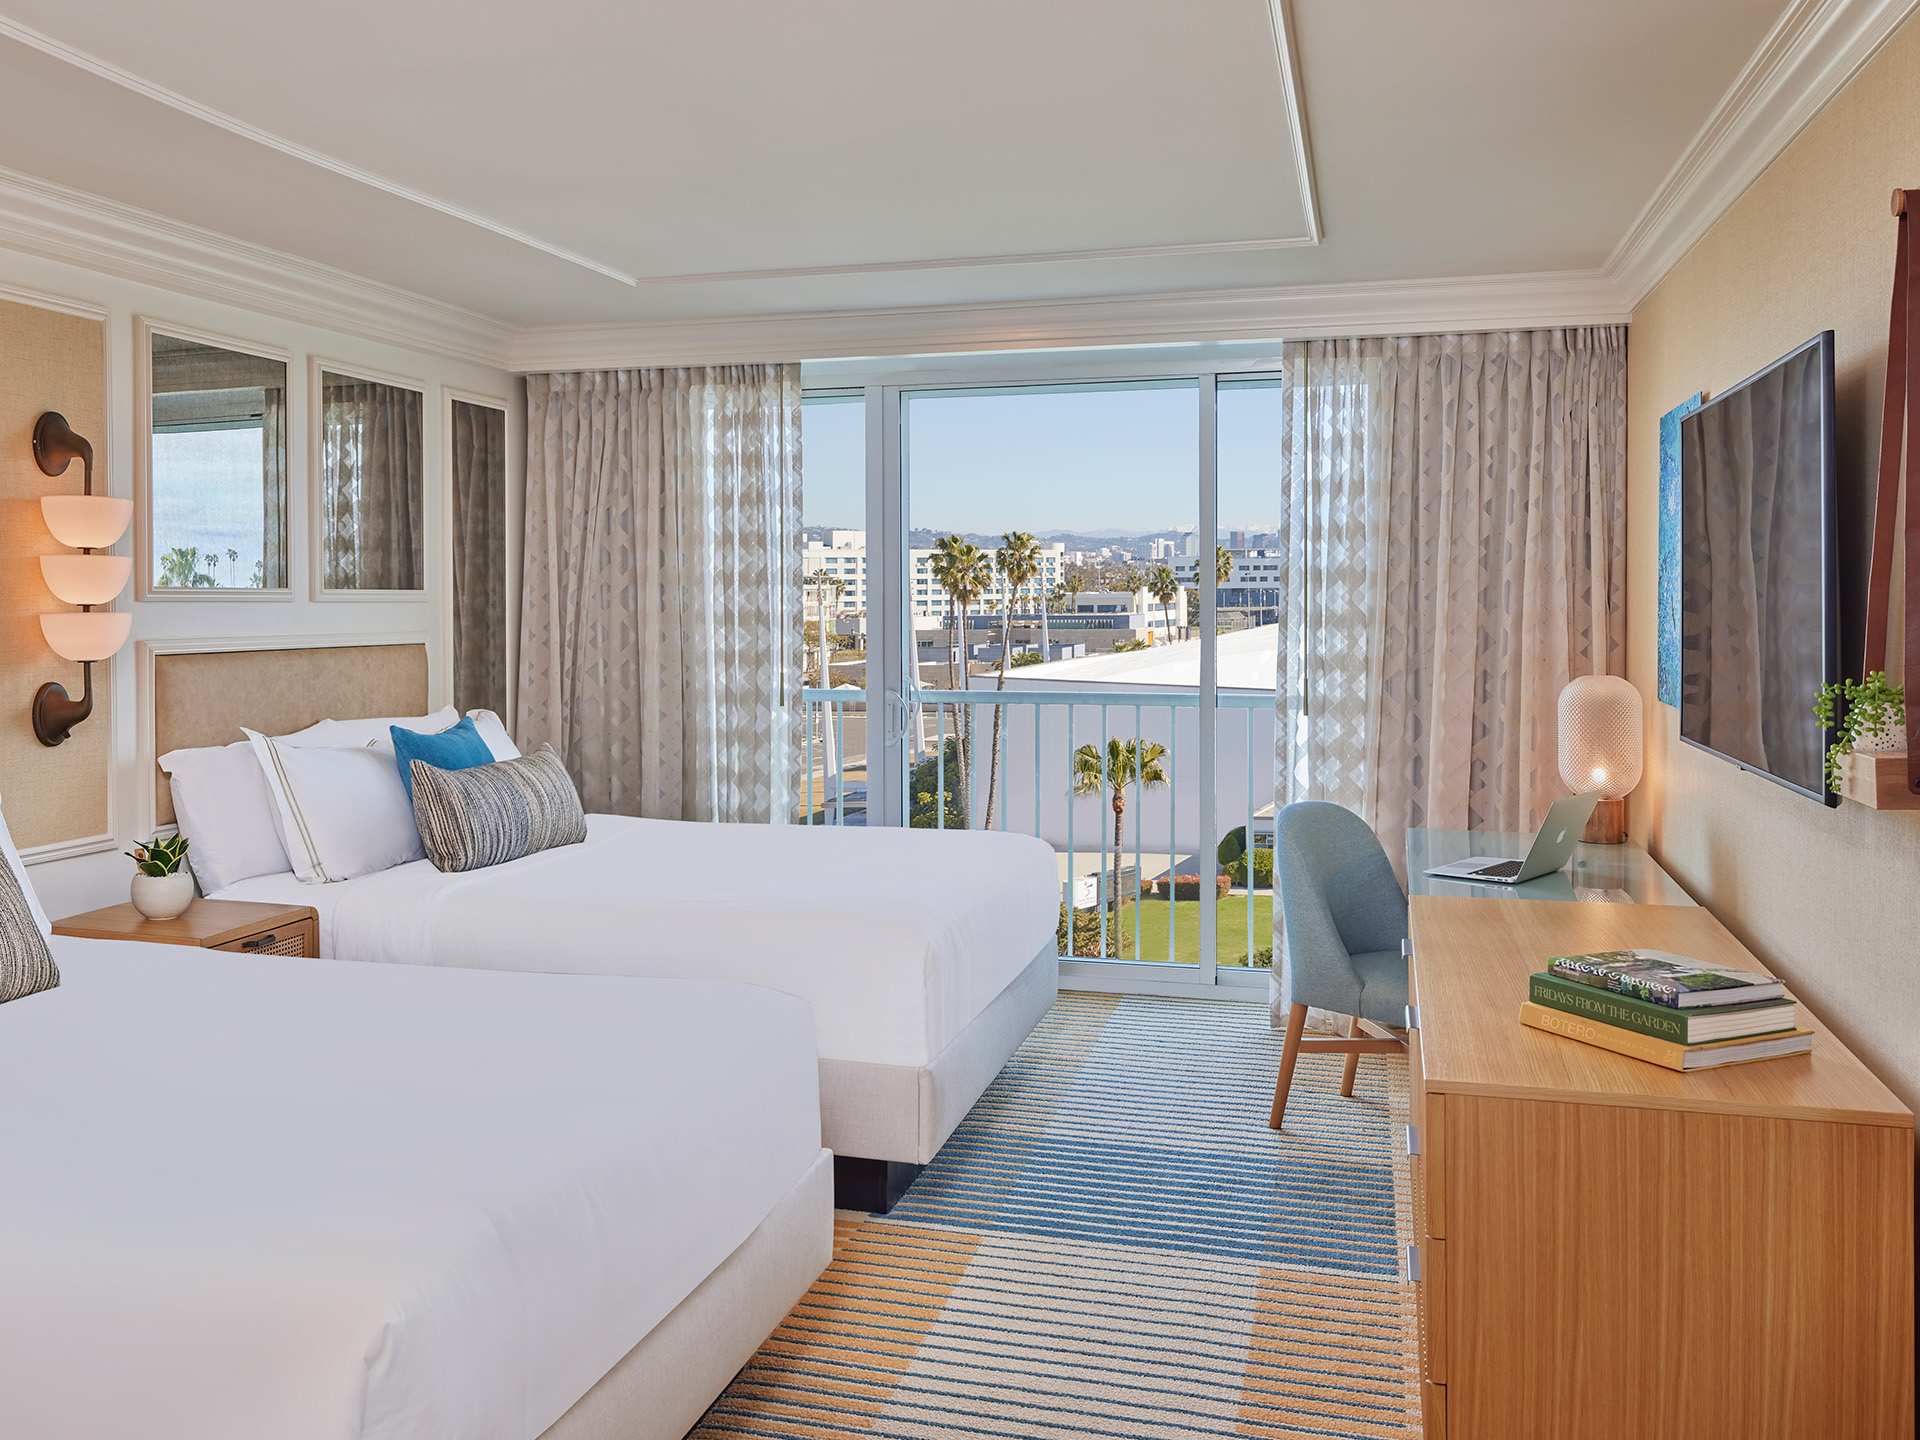 A double bed room at the Viceroy Santa Monica